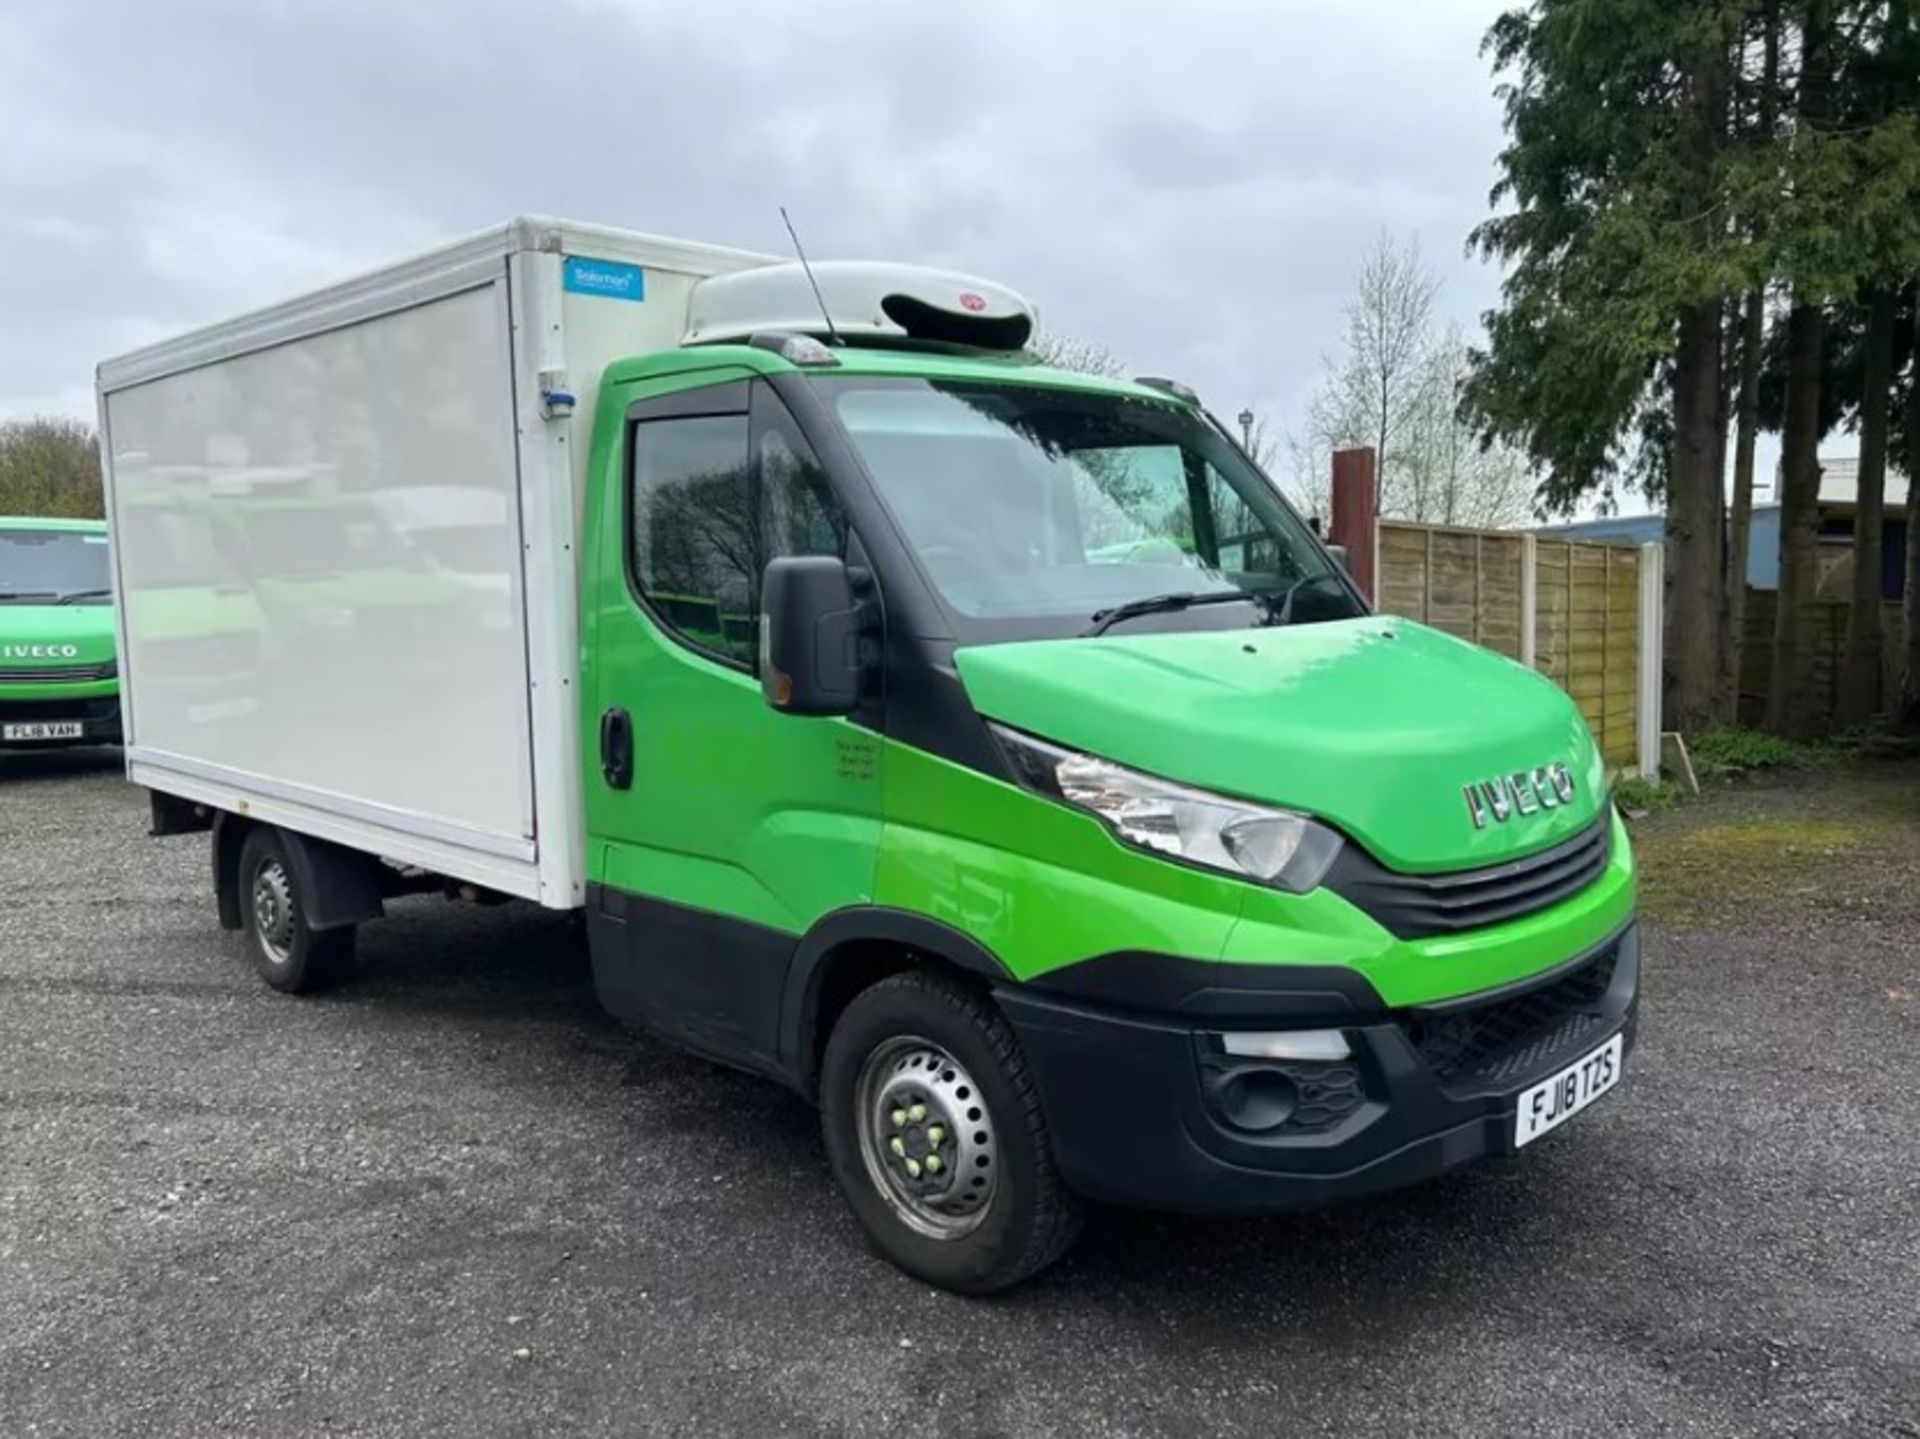 EXCEPTIONAL PERFORMANCE: 2018 IVECO DAILY 35S12 CHASSIS CAB